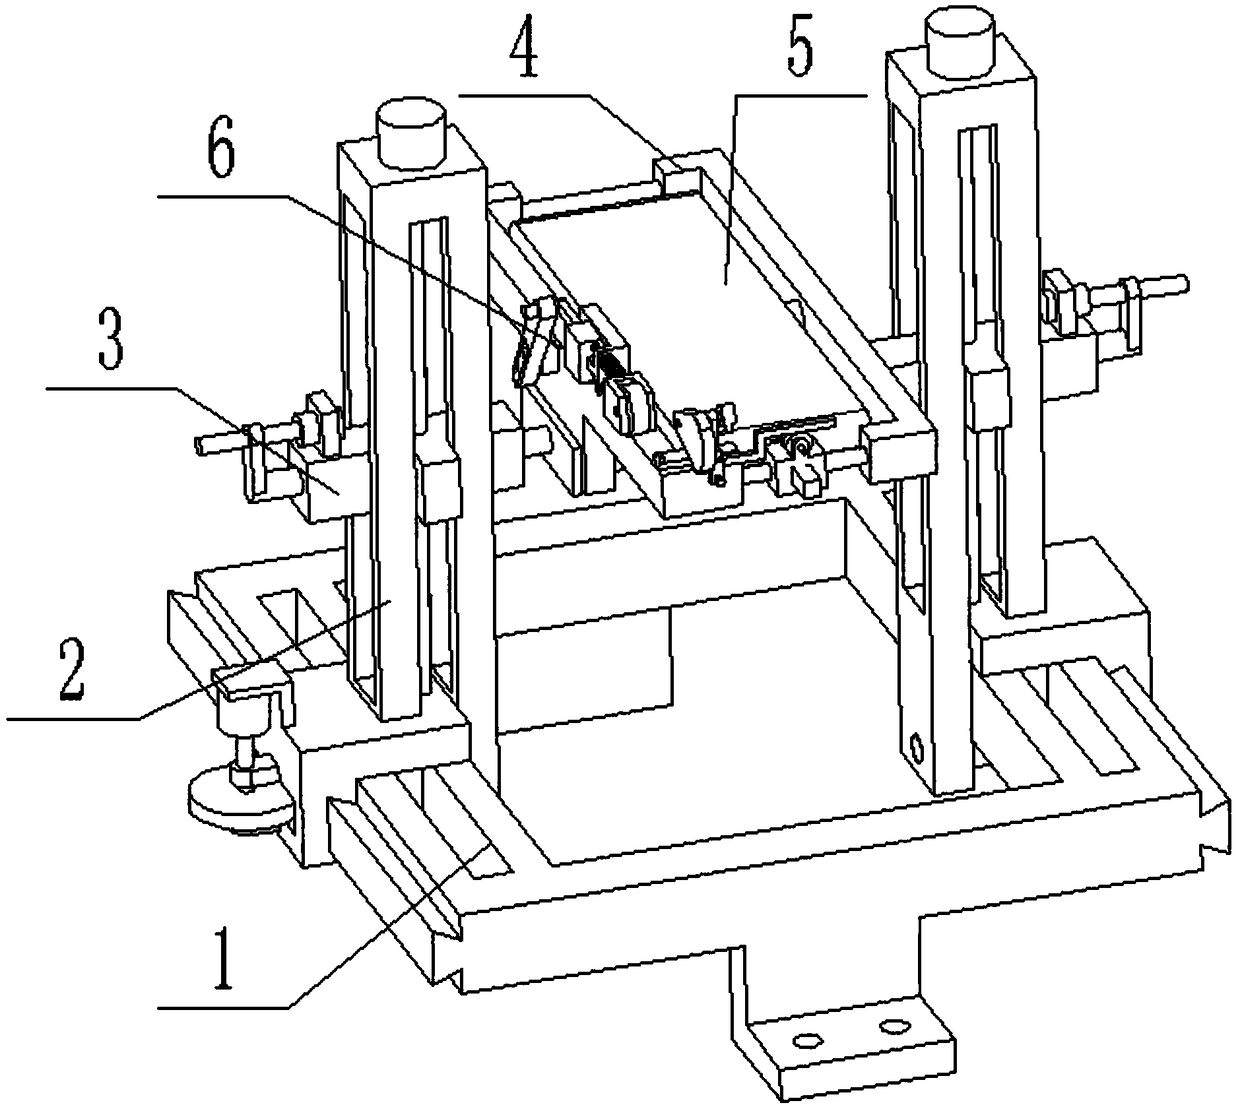 Adjustable support structure